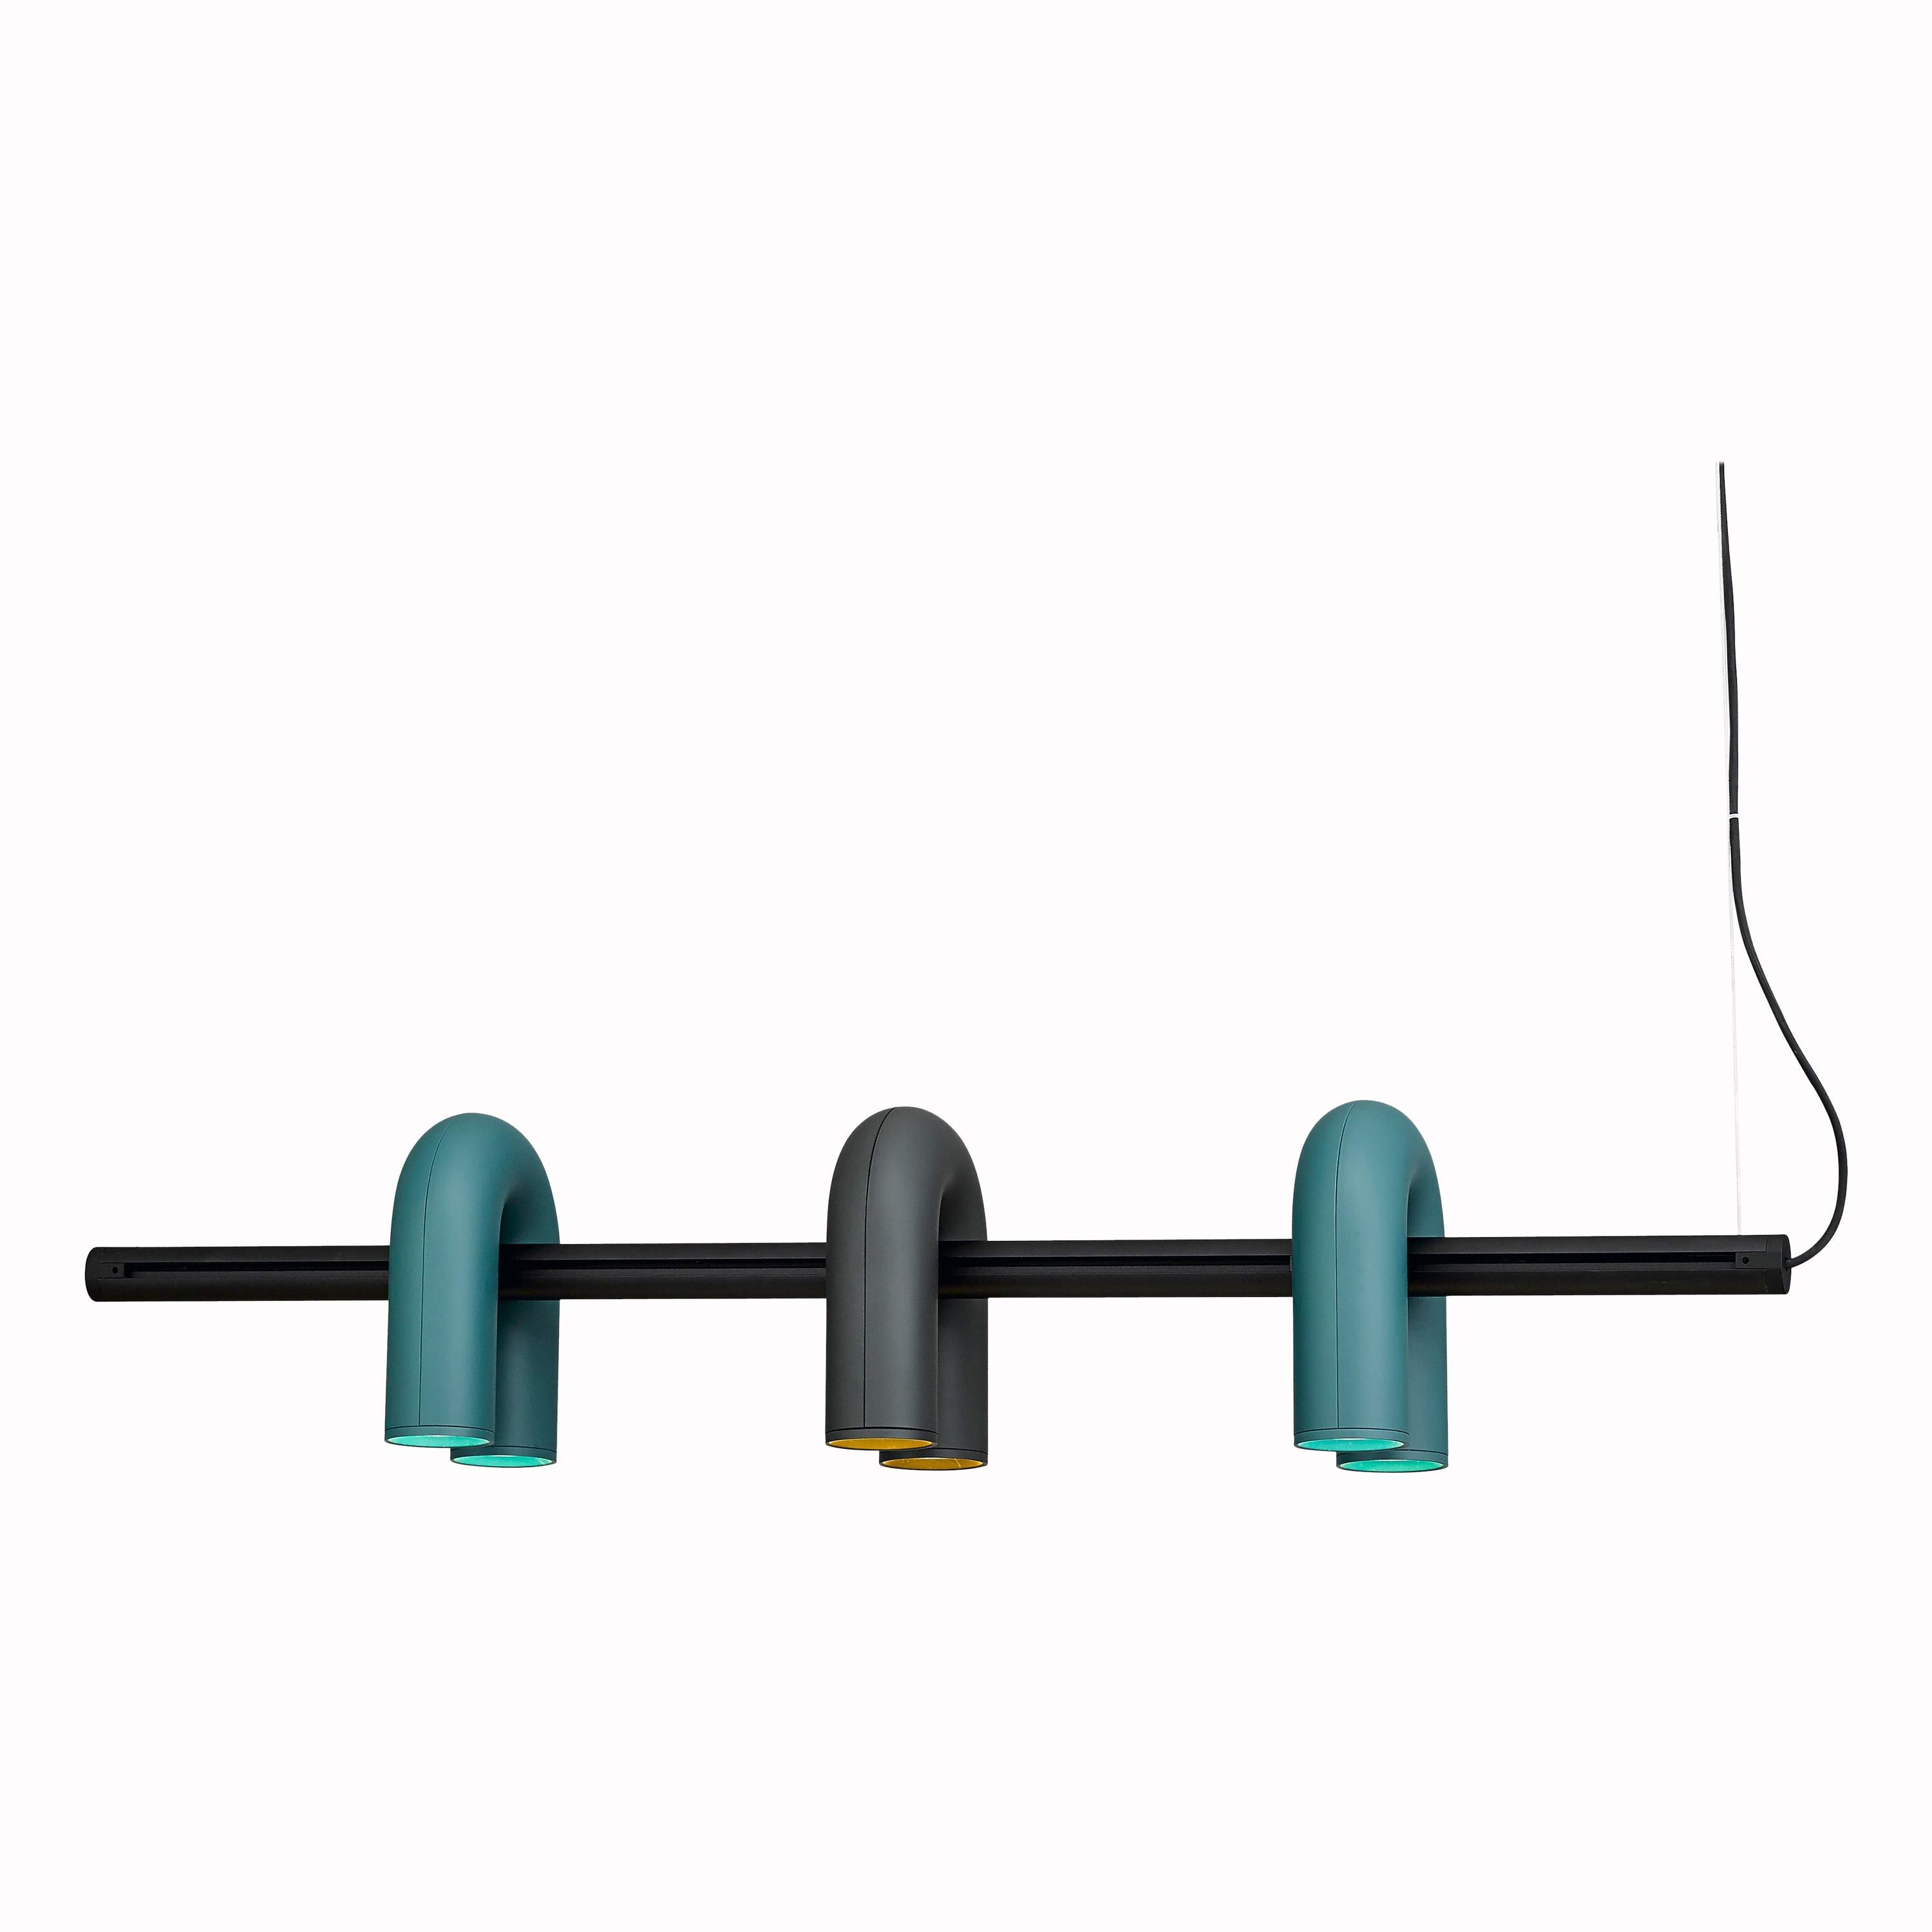 Contemporary Track Lights 'Cirkus' by AGO, Rail x 2 green, 1 charcoal For Sale